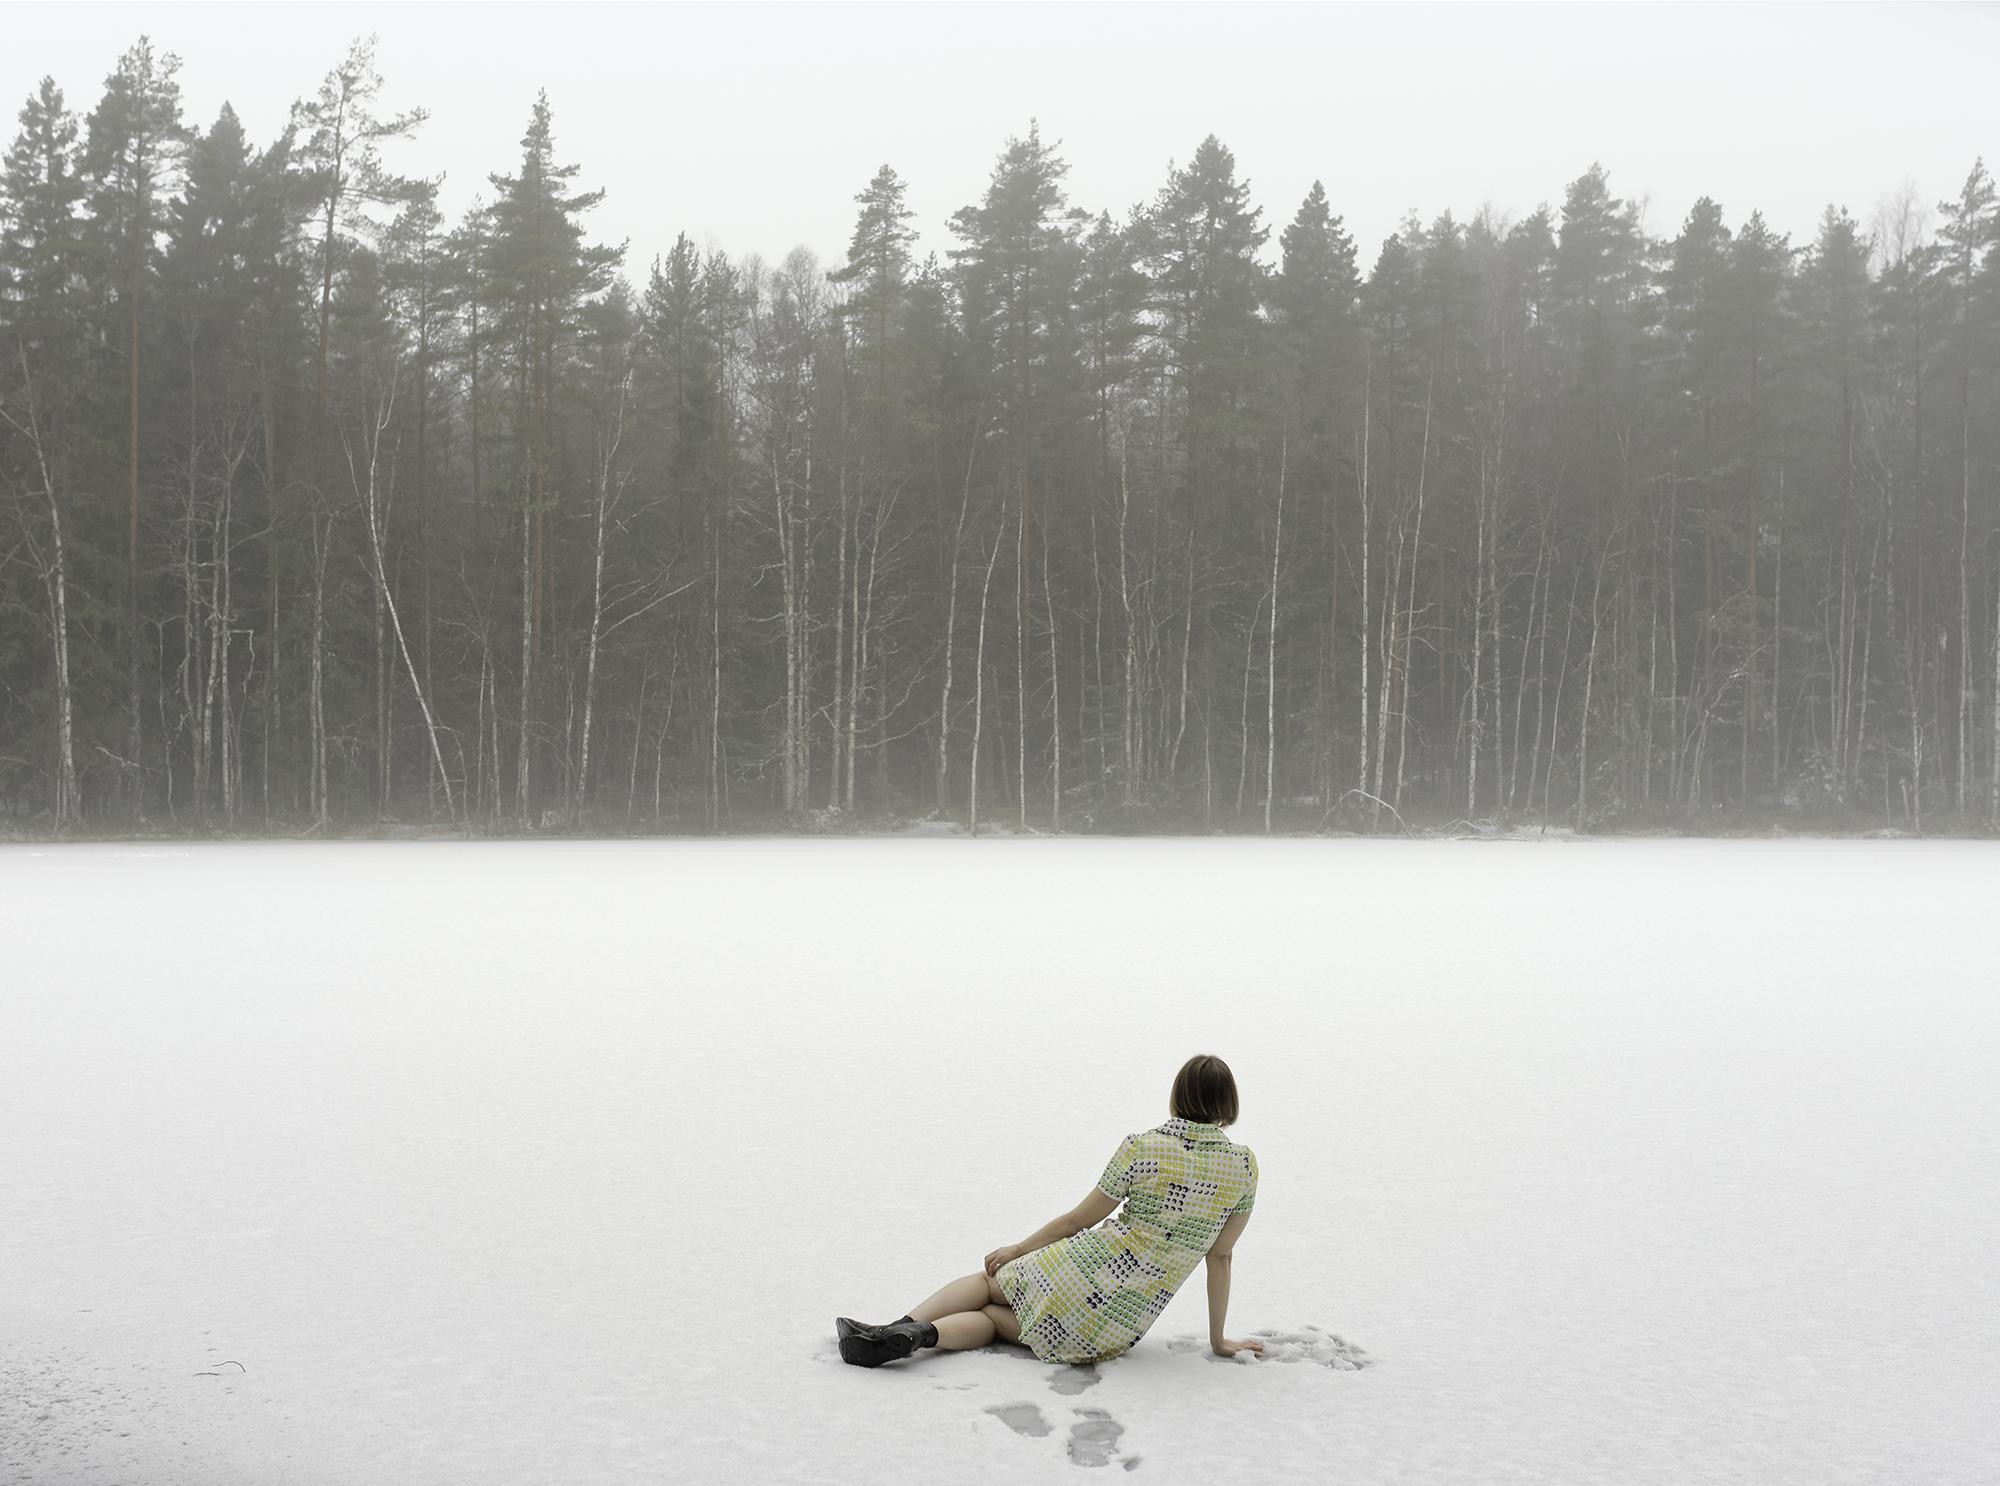 Fill with Own Imagination (Snow), 2016 / ELINA BROTHERUS